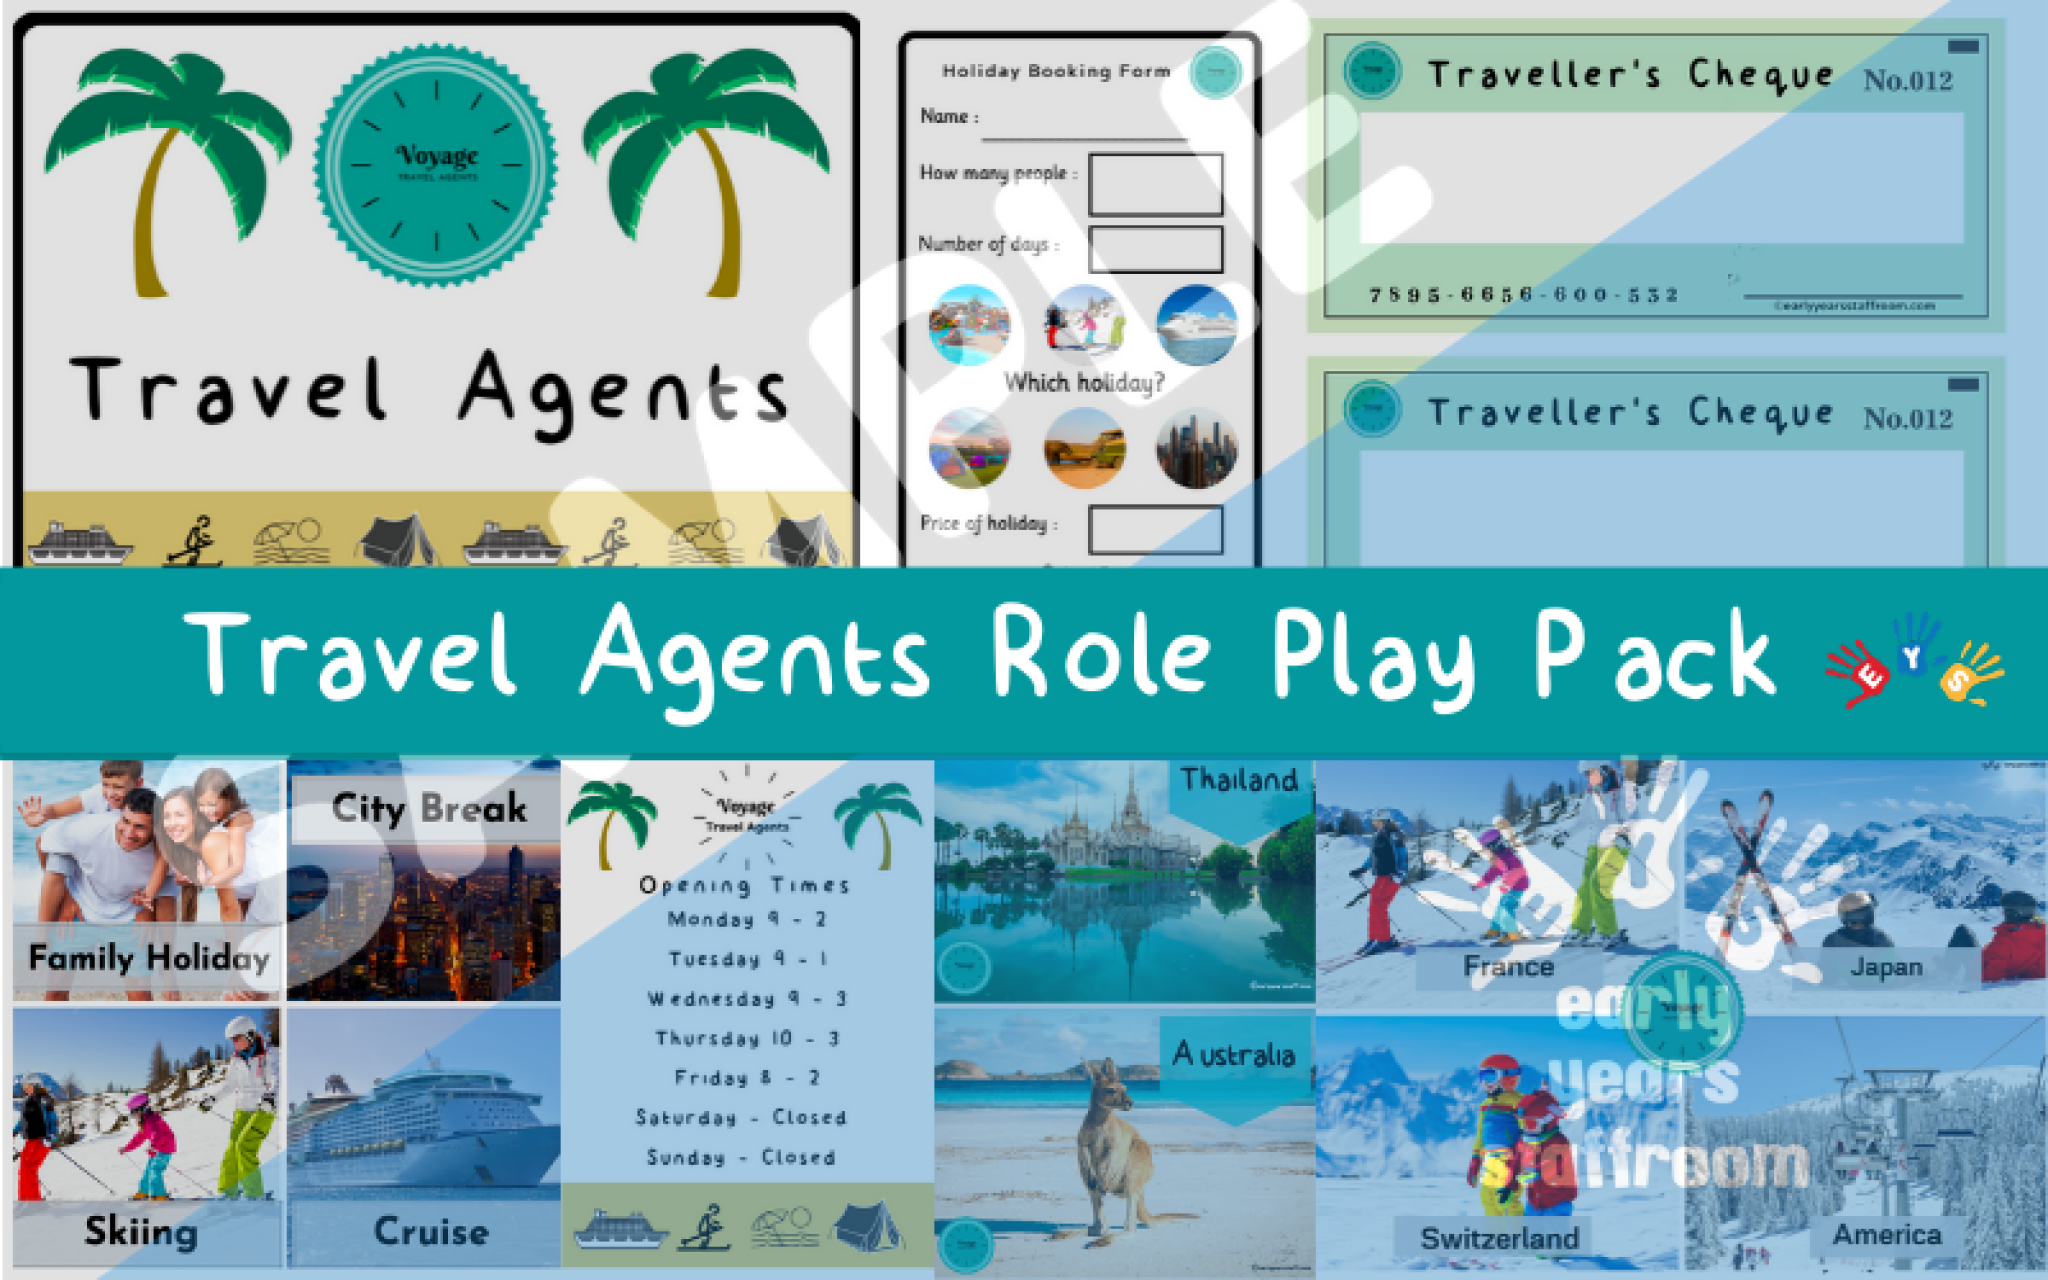 travel agent project for students